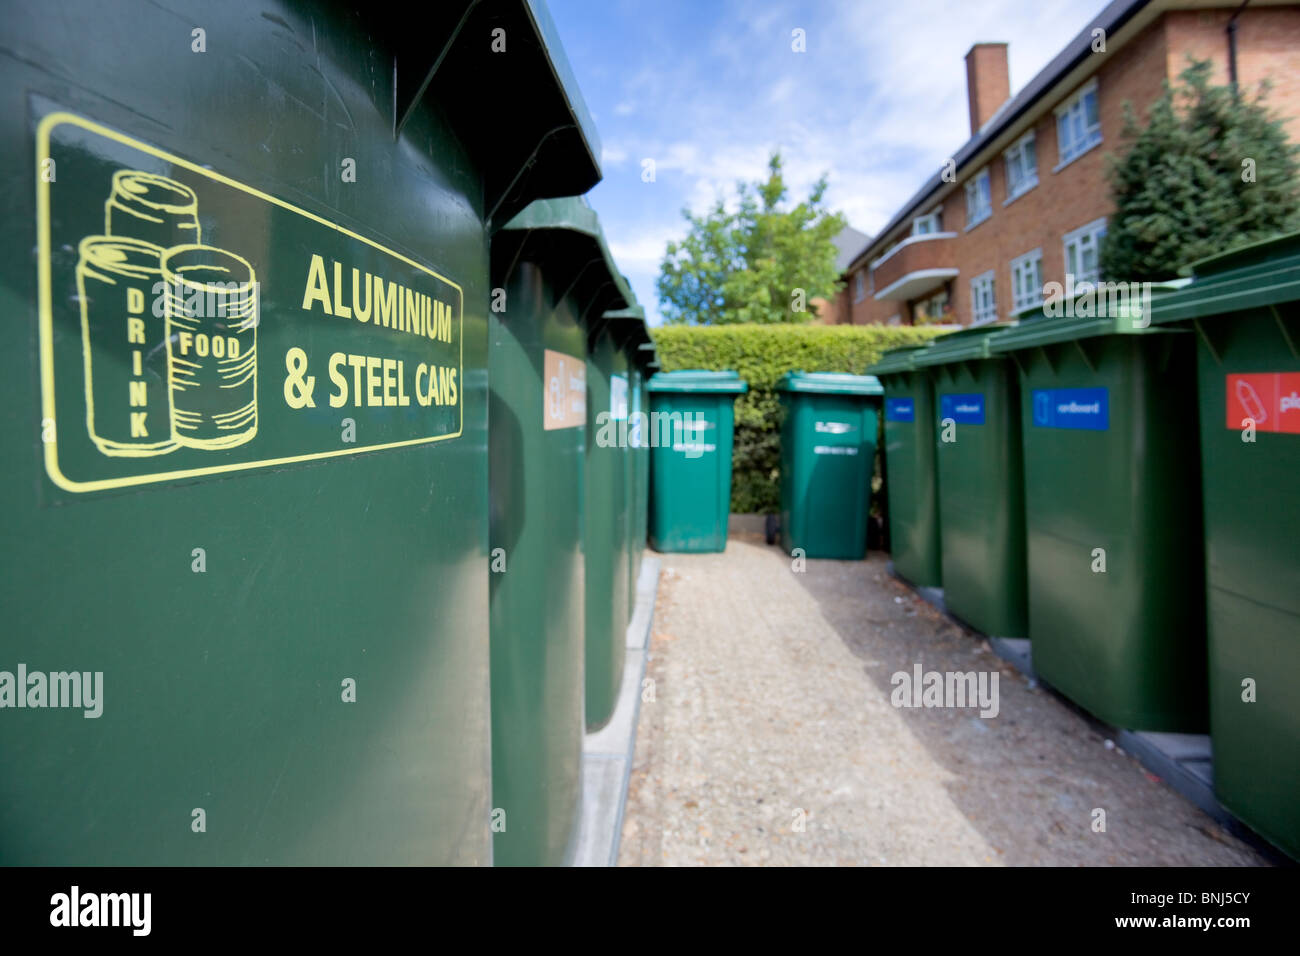 Aluminium and Steel Cans recycling bins Stock Photo